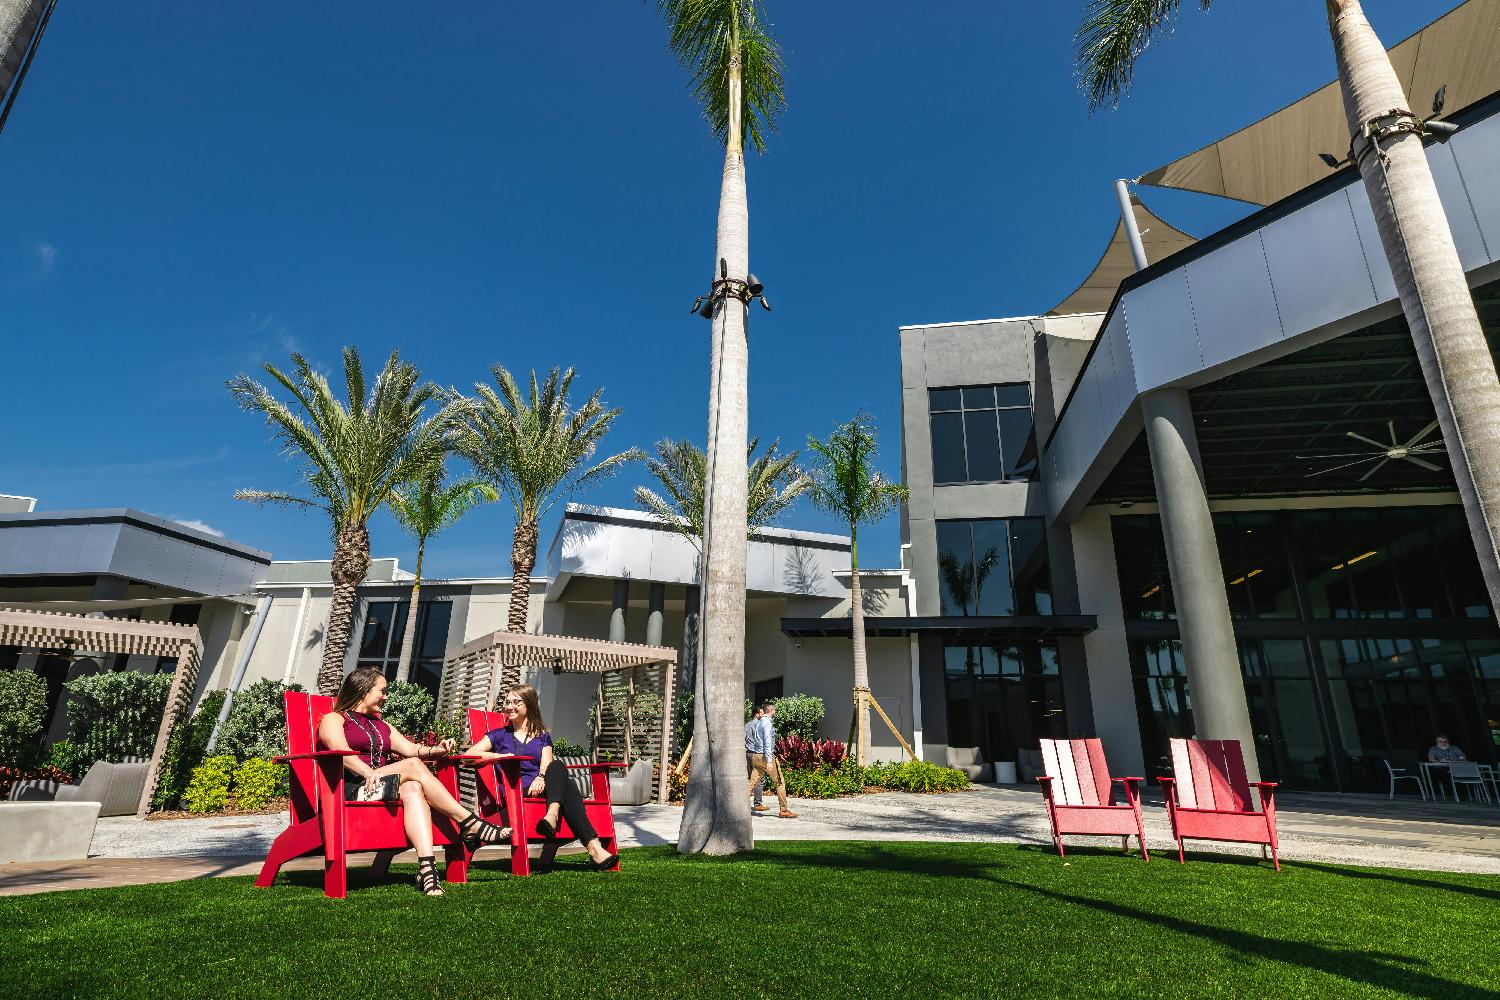 Power Design's 40-acre campus is connected through The Plaza, complete with plenty of outdoor seating and cabanas.